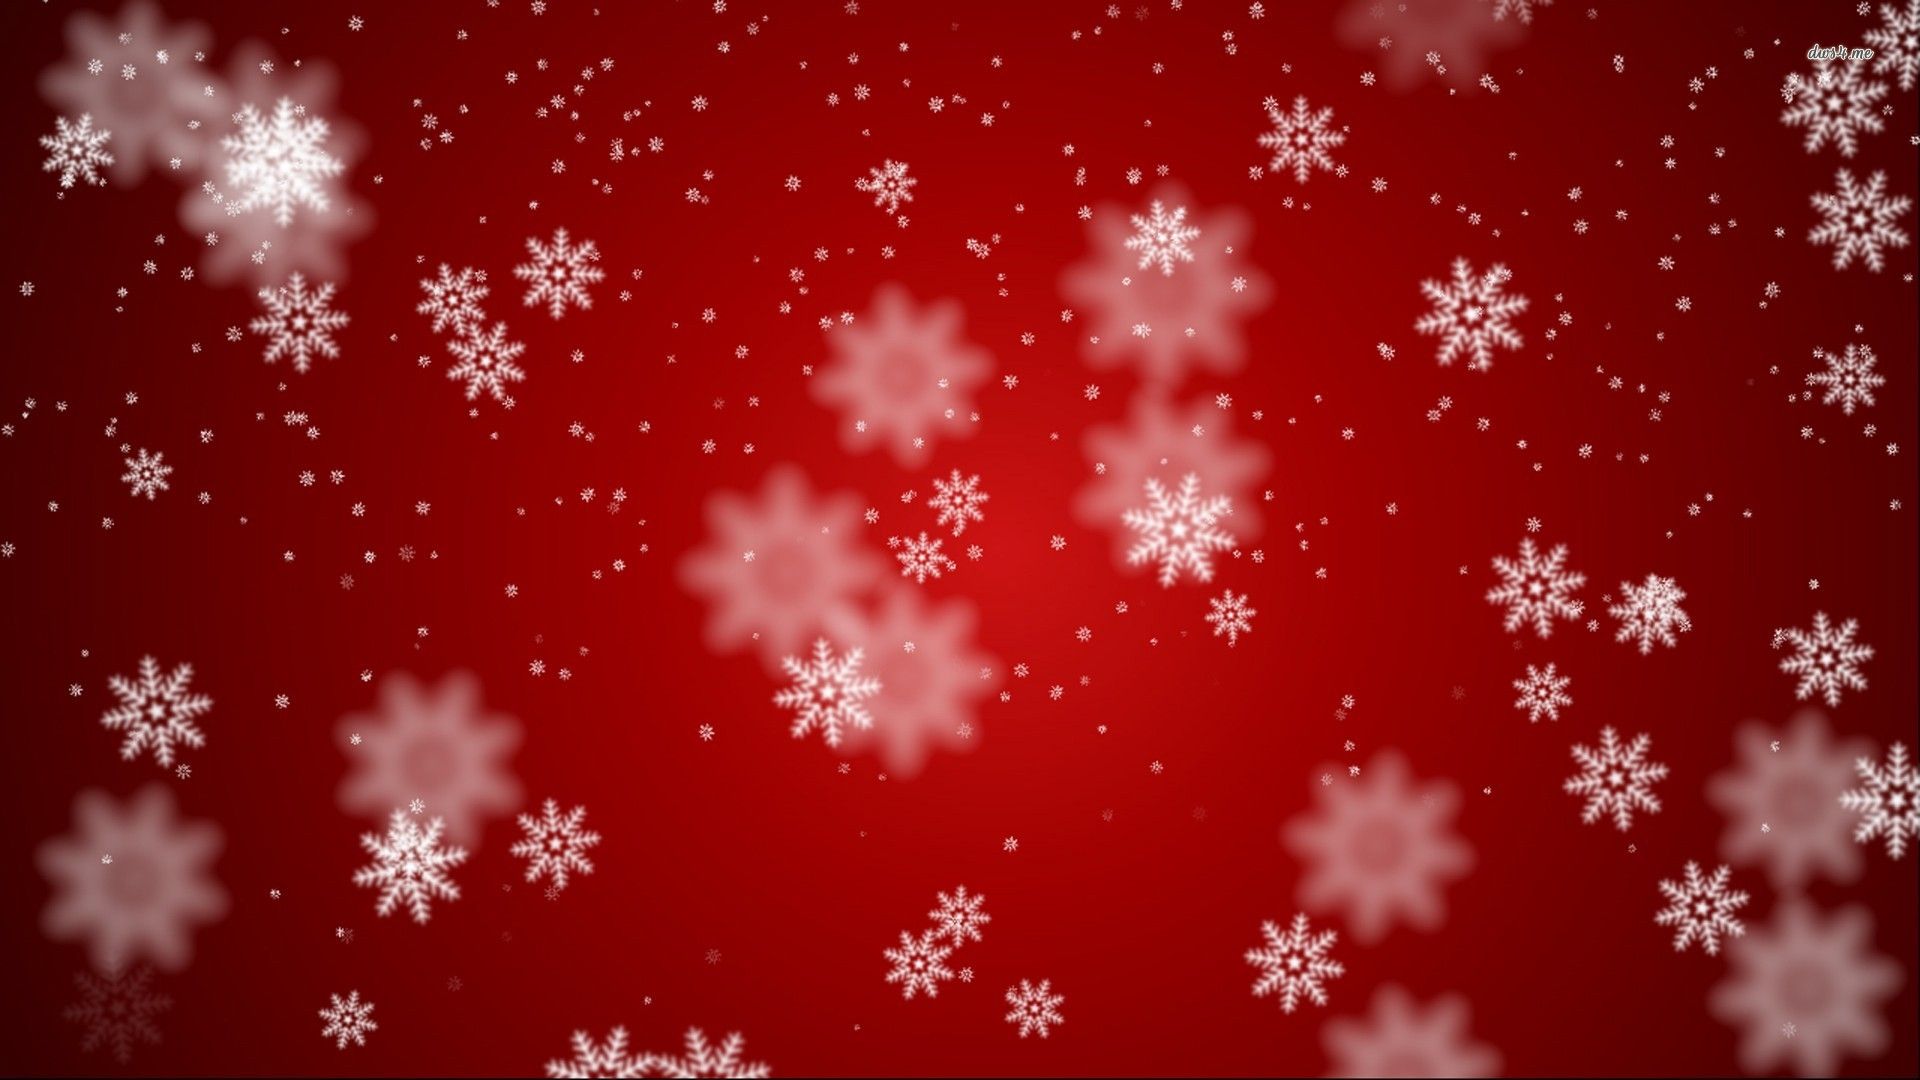 red christmas snowflake backgrounds